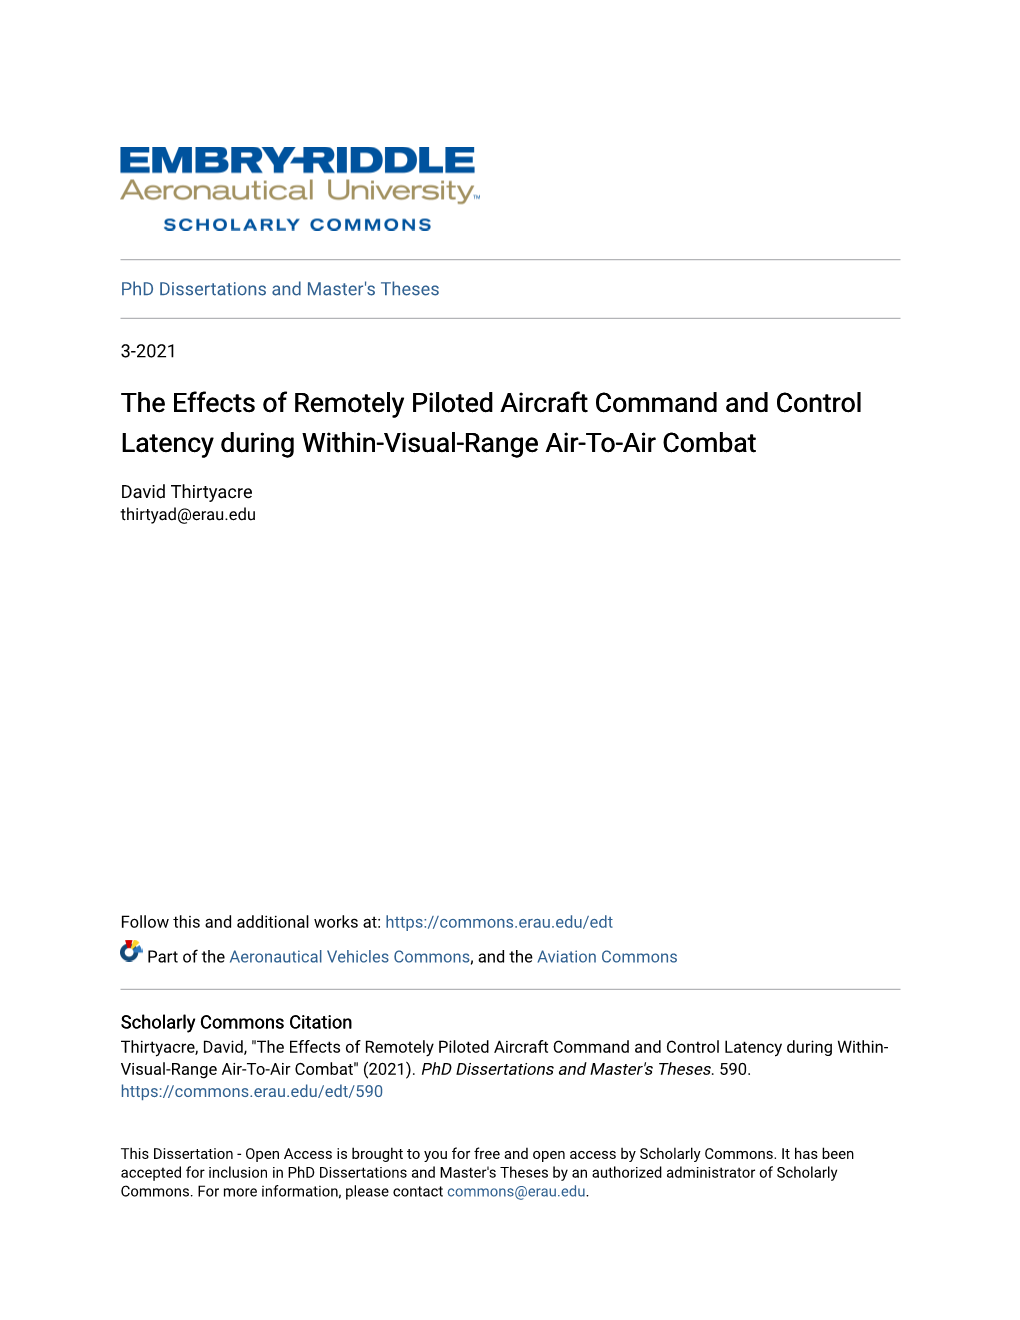 The Effects of Remotely Piloted Aircraft Command and Control Latency During Within-Visual-Range Air-To-Air Combat